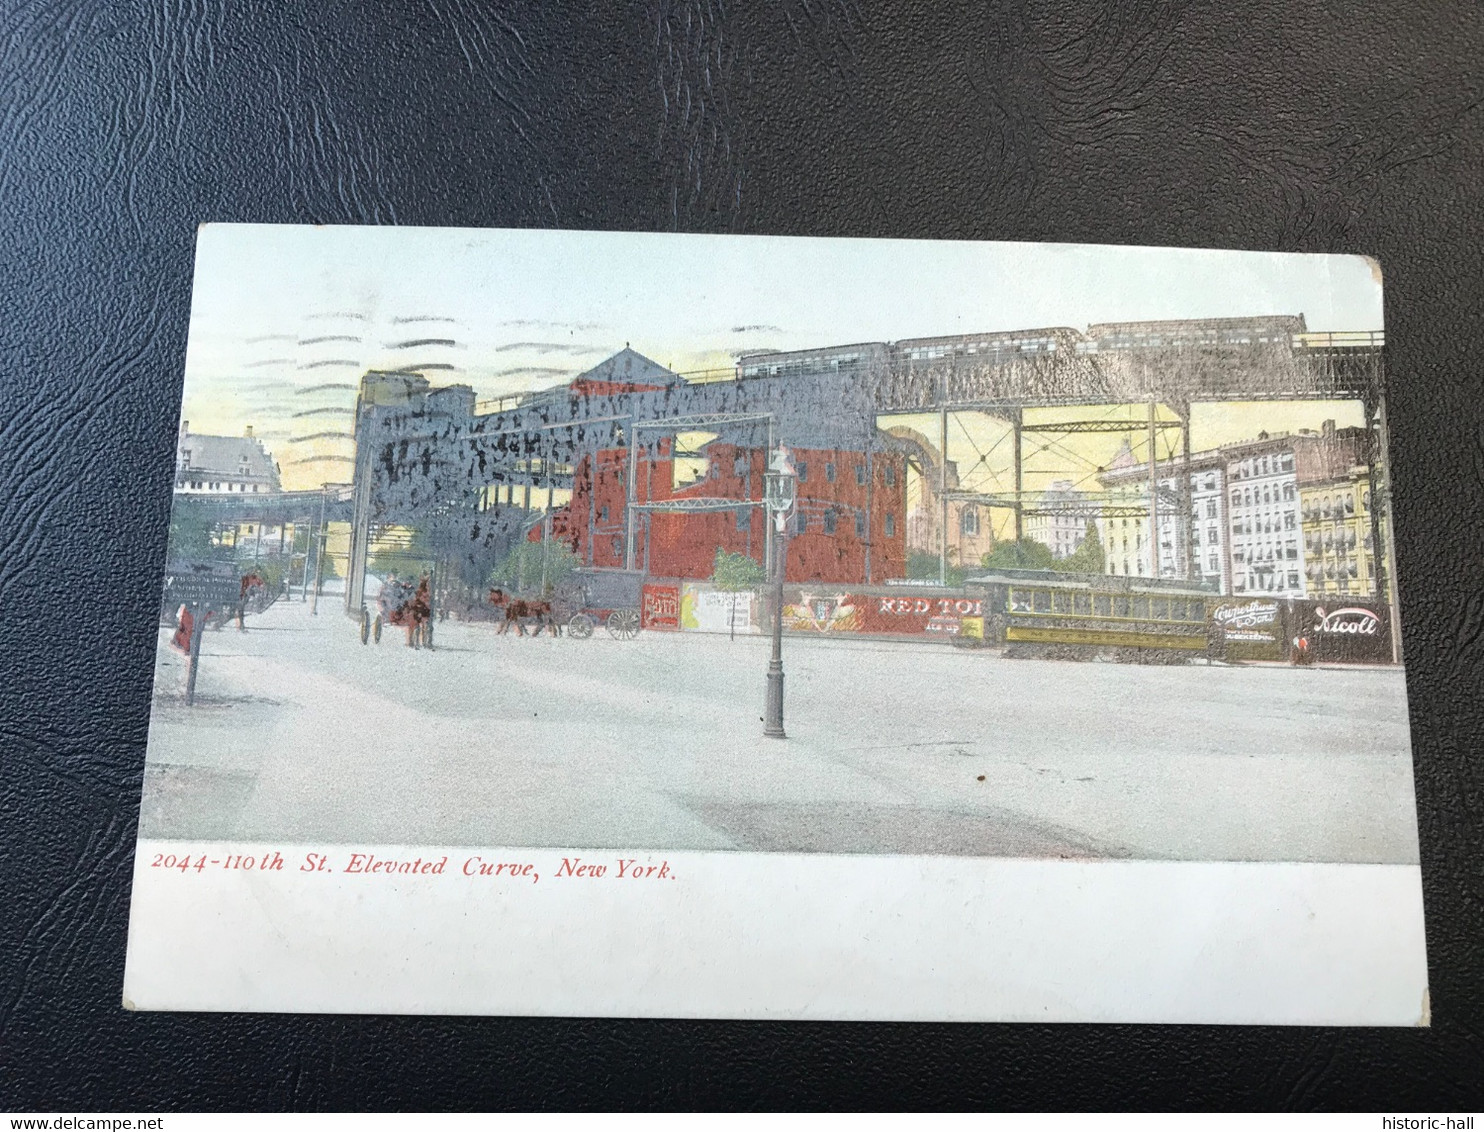 2044 - 110th  St. Elevated Curve, New York - 1906 - Transports